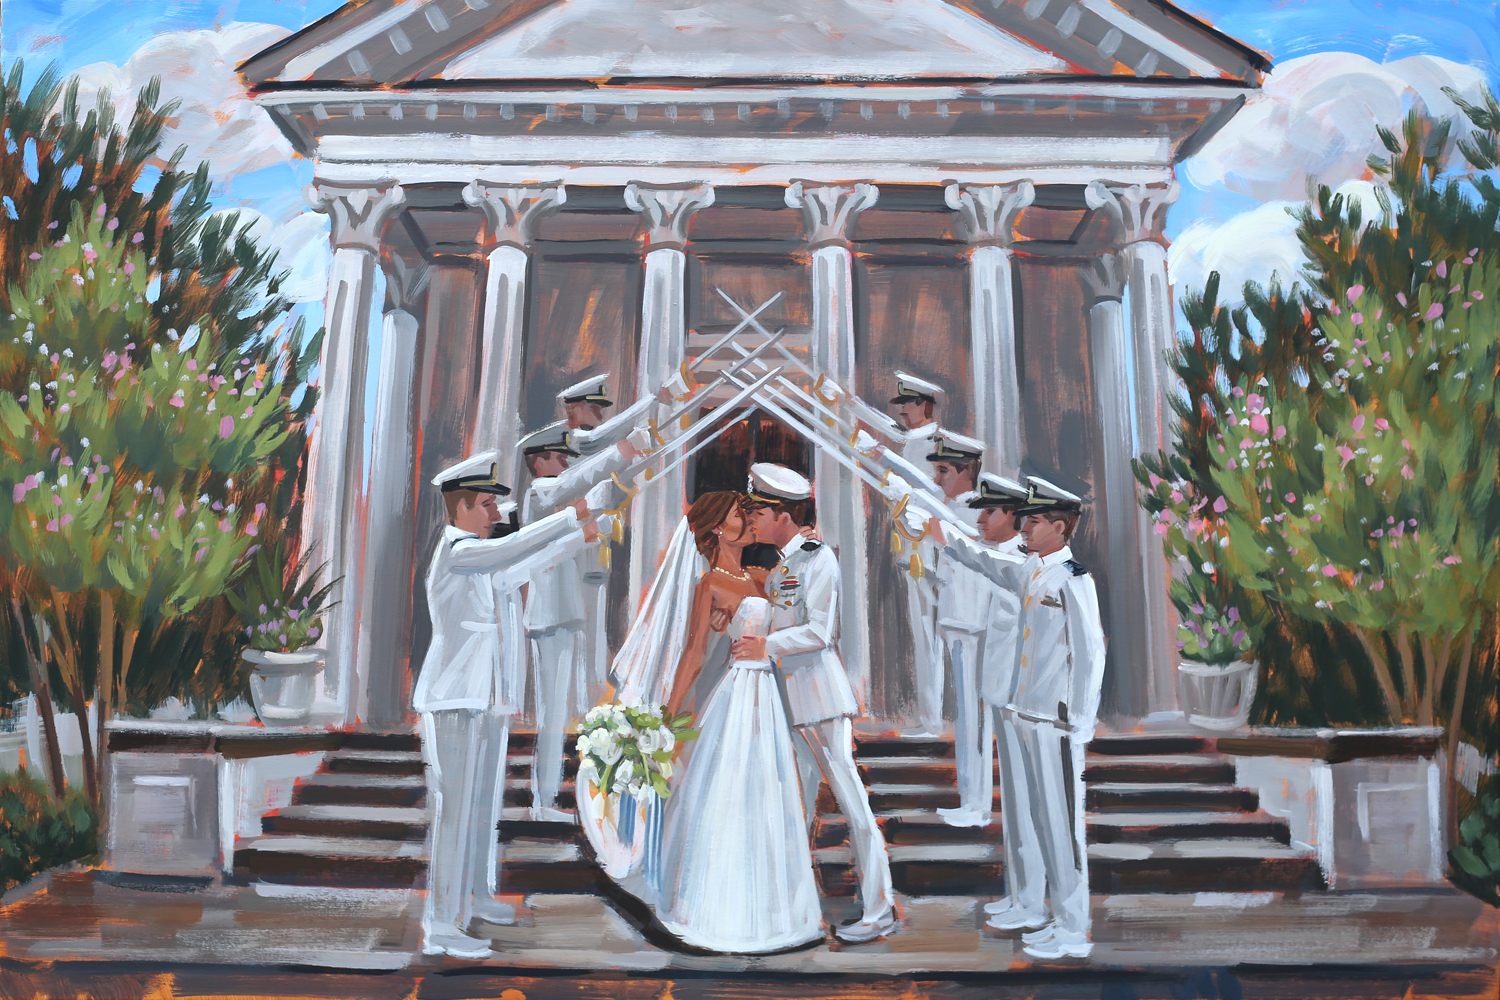 Live wedding painter, Ben Keys, captured Becca + Scott's iconic sword arch moment as they were exiting their ceremony held at Trinity United Methodist Church in downtown Charleston, SC.